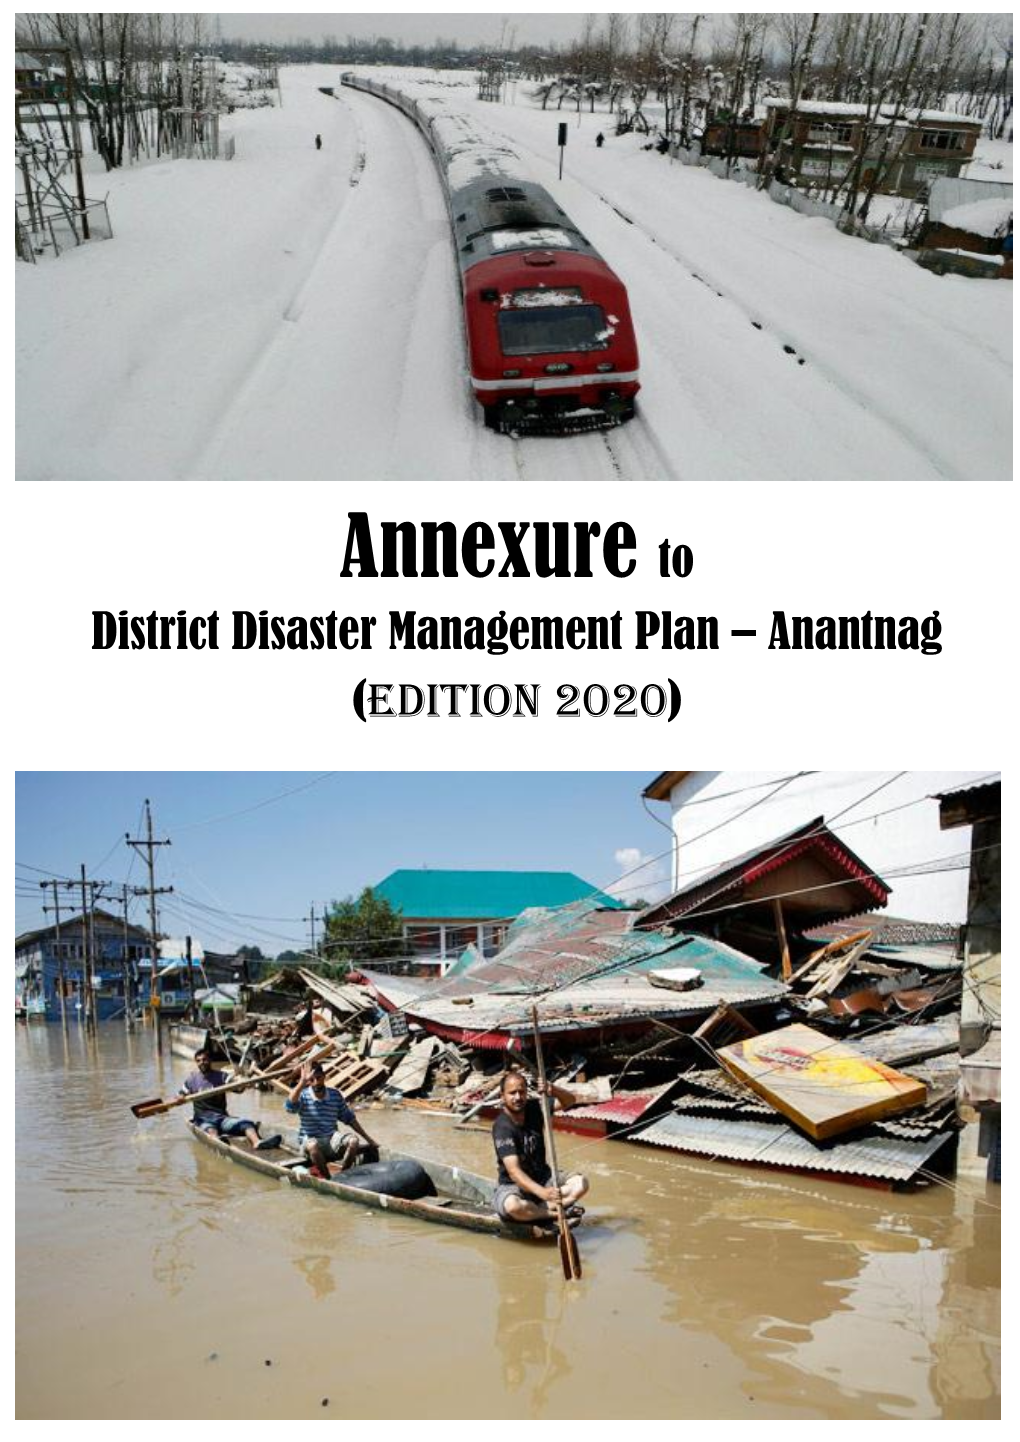 Annexure to District Disaster Management Plan – Anantnag (Edition 2020)